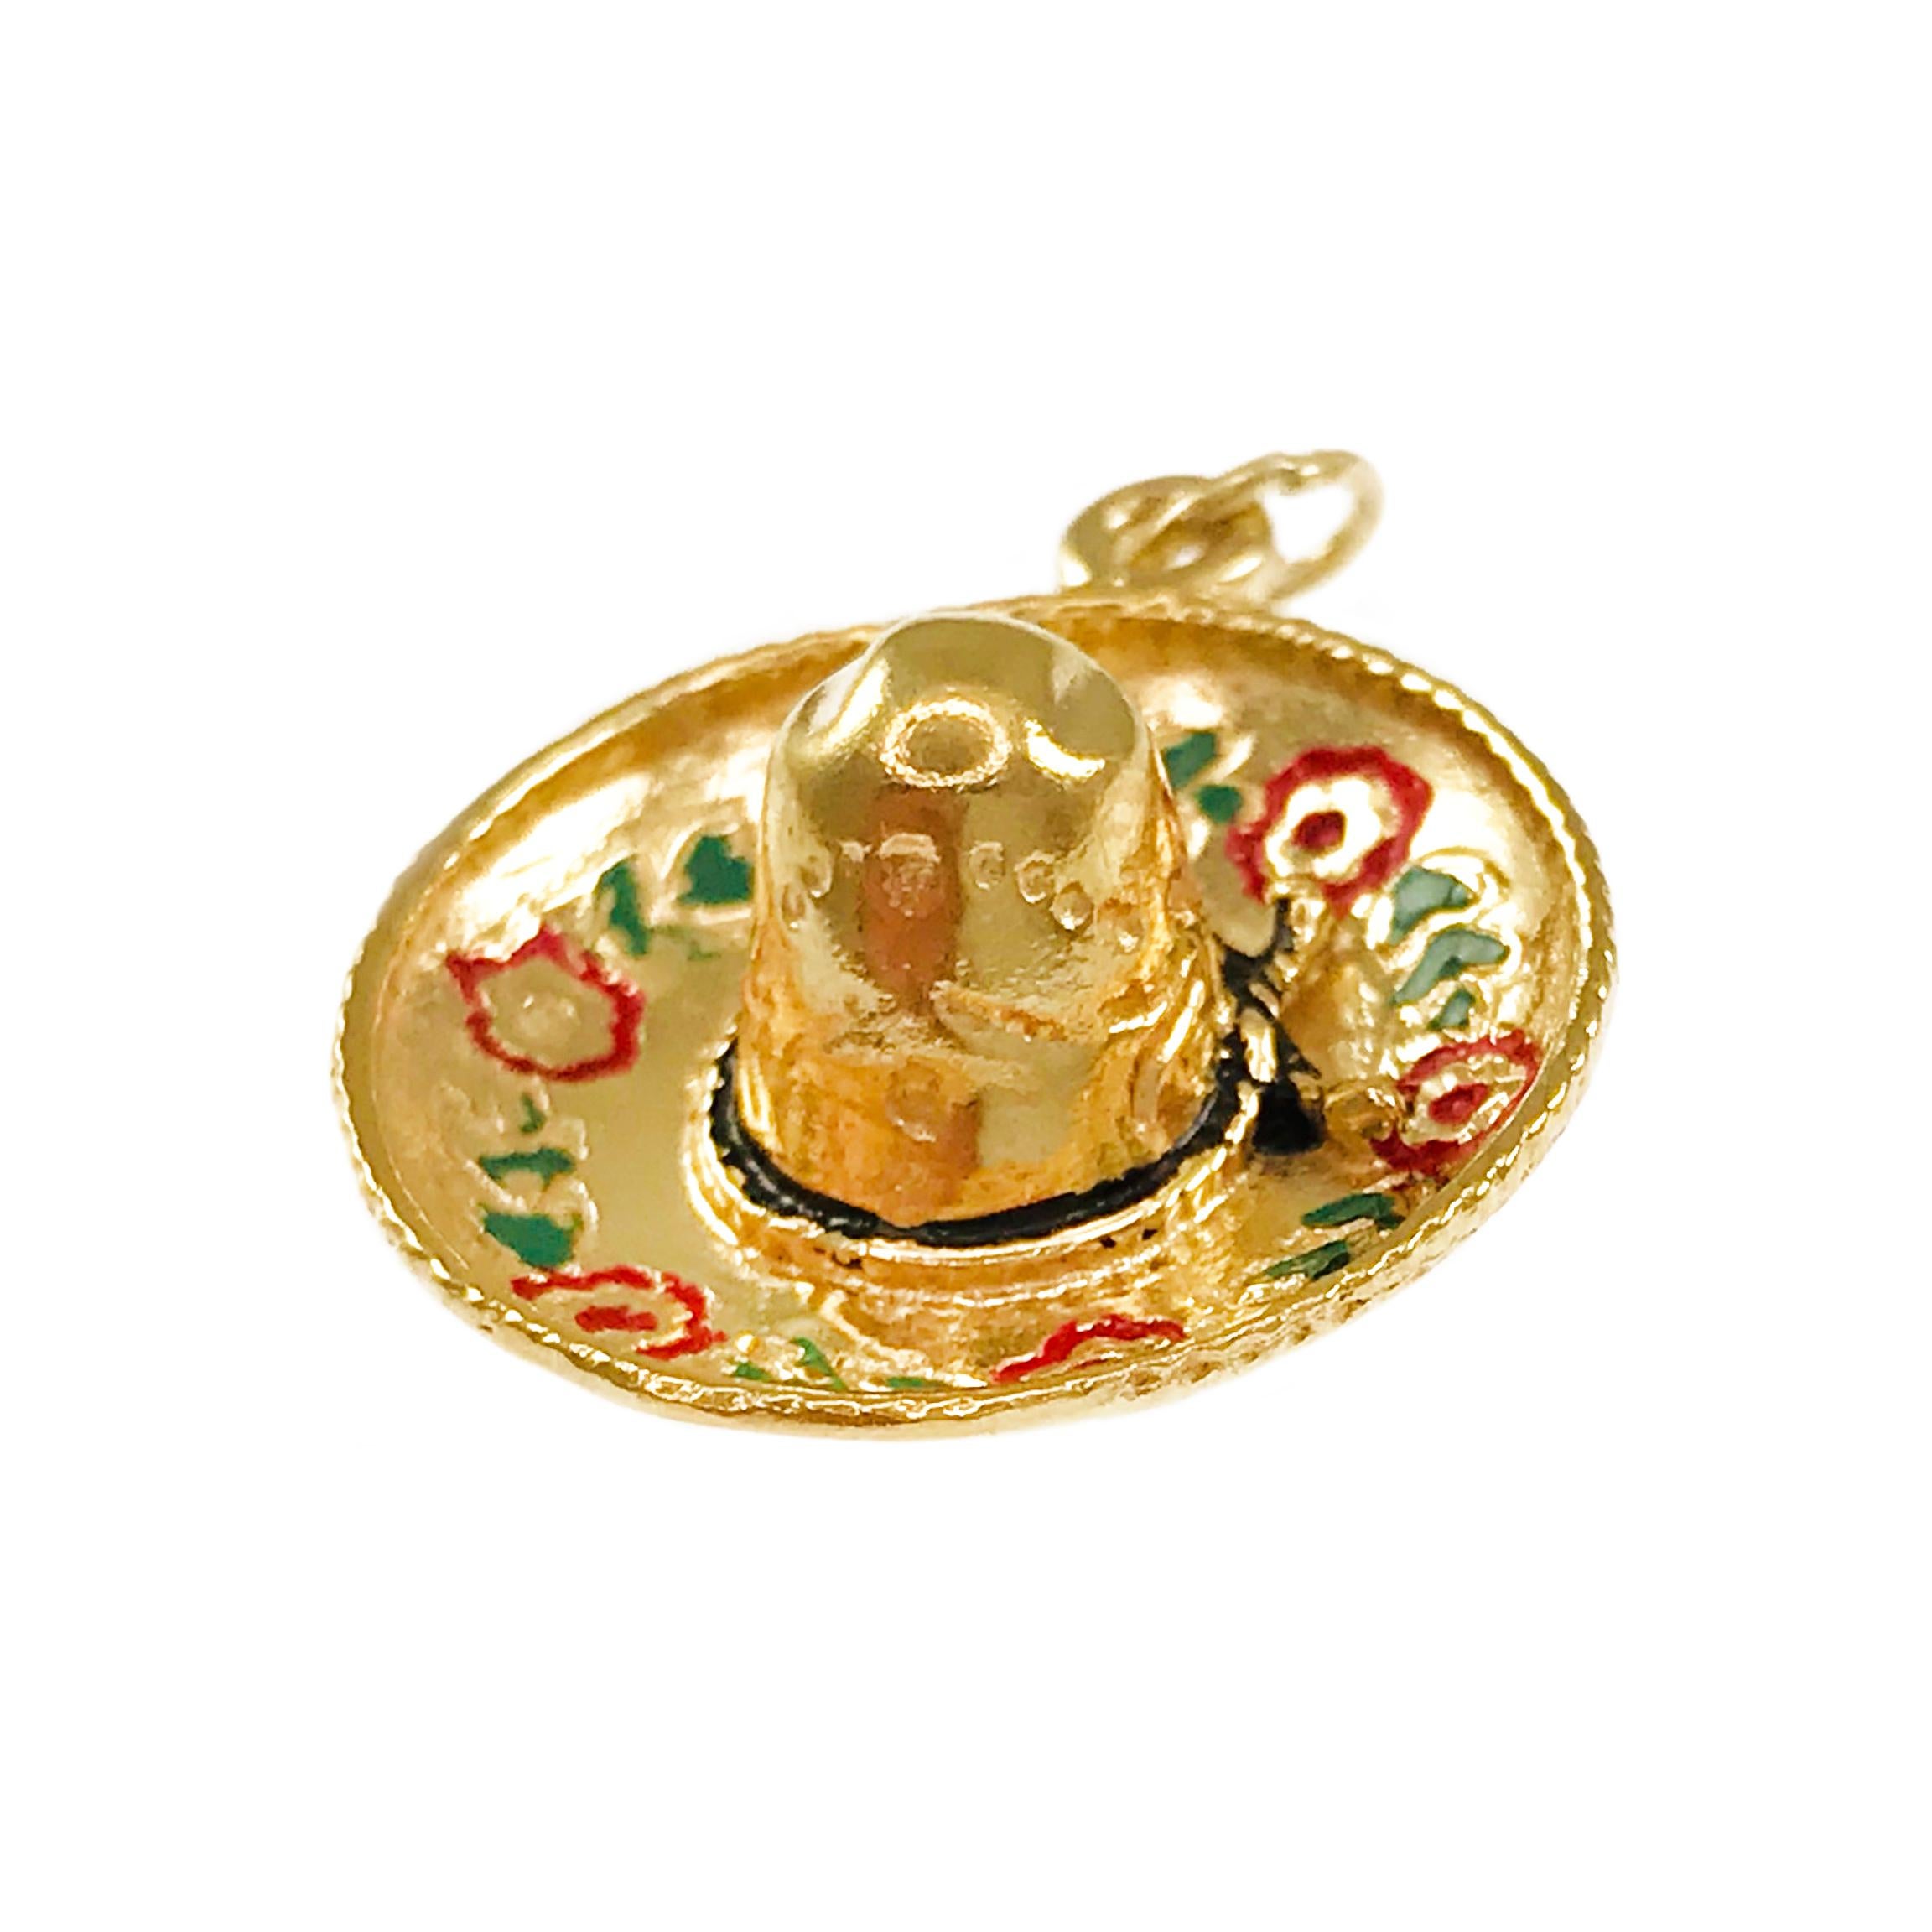 14 Karat Sombrero Pendant. This lovely sombrero pendant offers so much detail, there are flowers and leaves motif highlighted with red and green enamel respectively. The pendant measures 8.6mm wide x 24.7mm tall x 20.33mm long. Stamped on the back